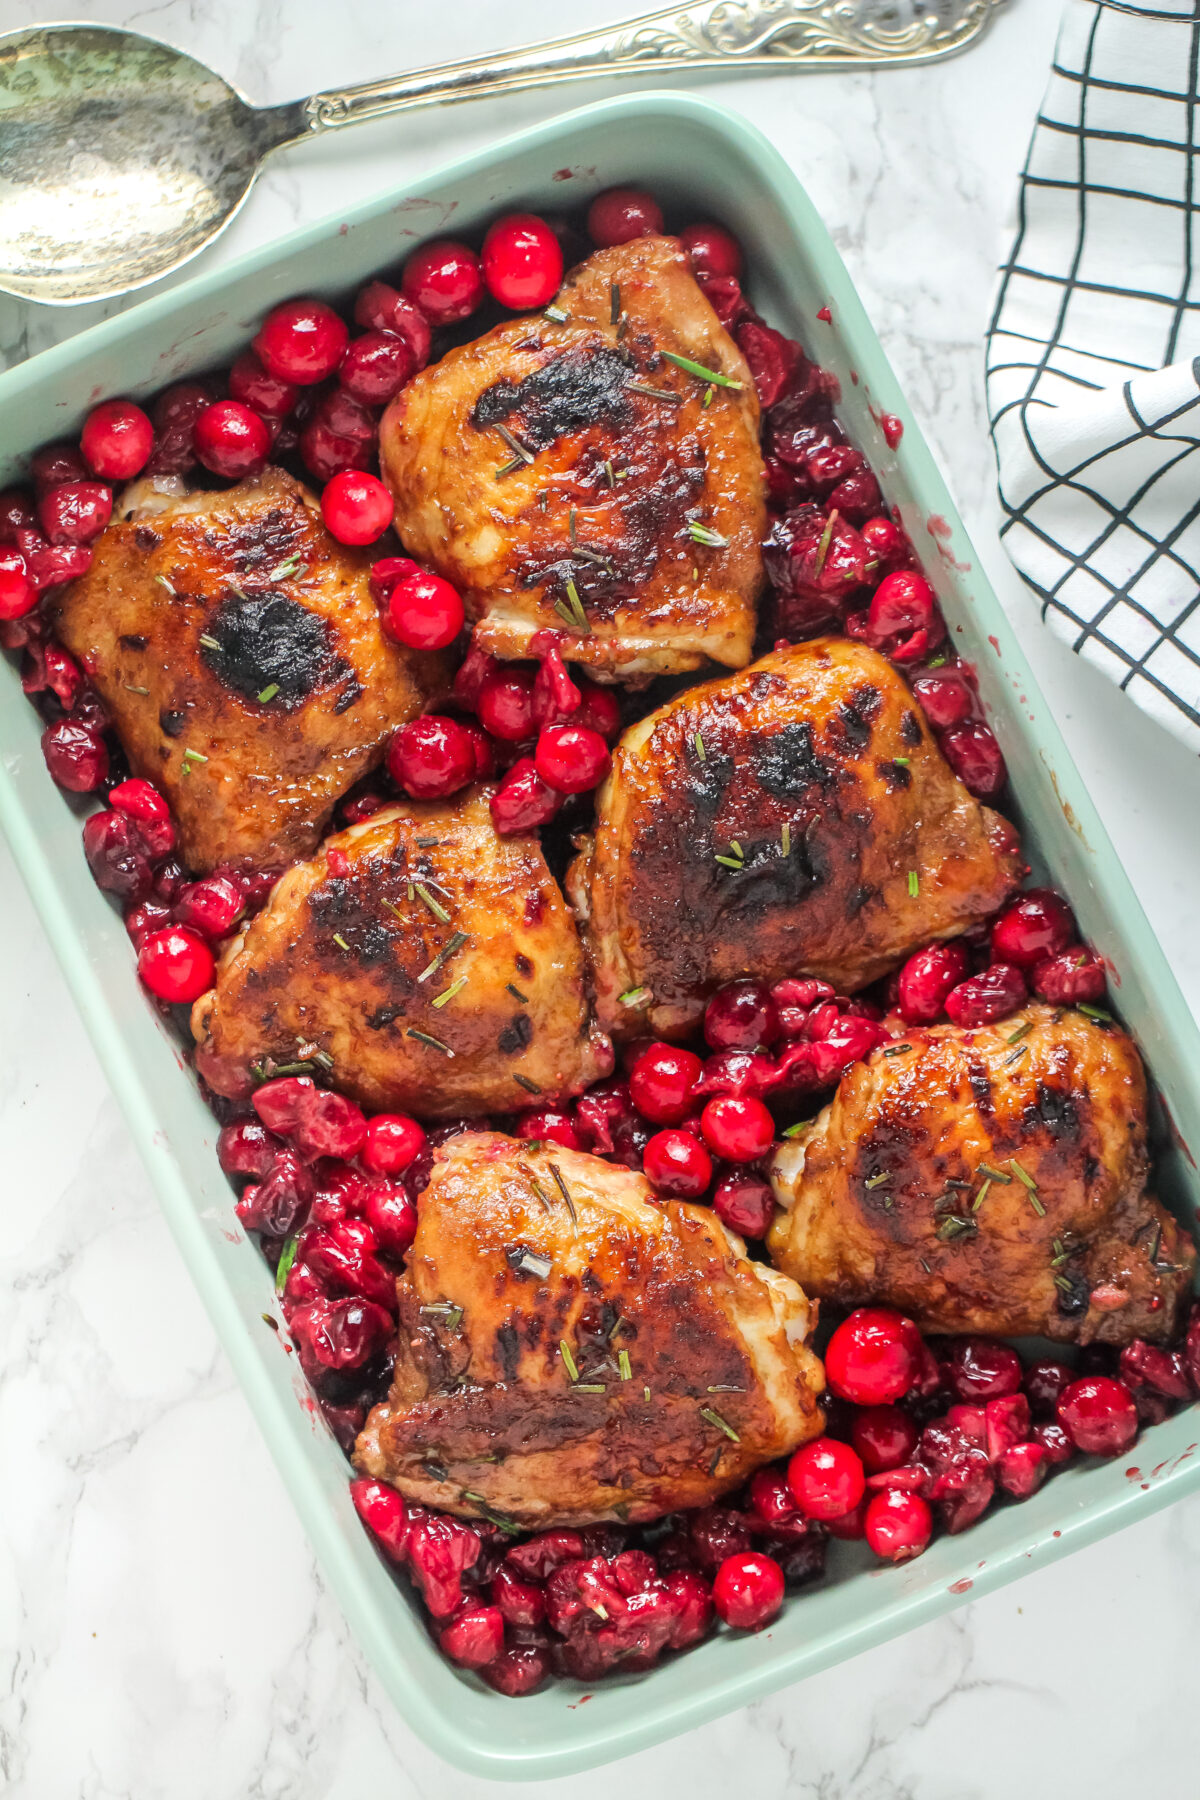 This easy cranberry chicken recipe is a delicious way to feed the family over the holidays or any time you want a good home cooked meal.